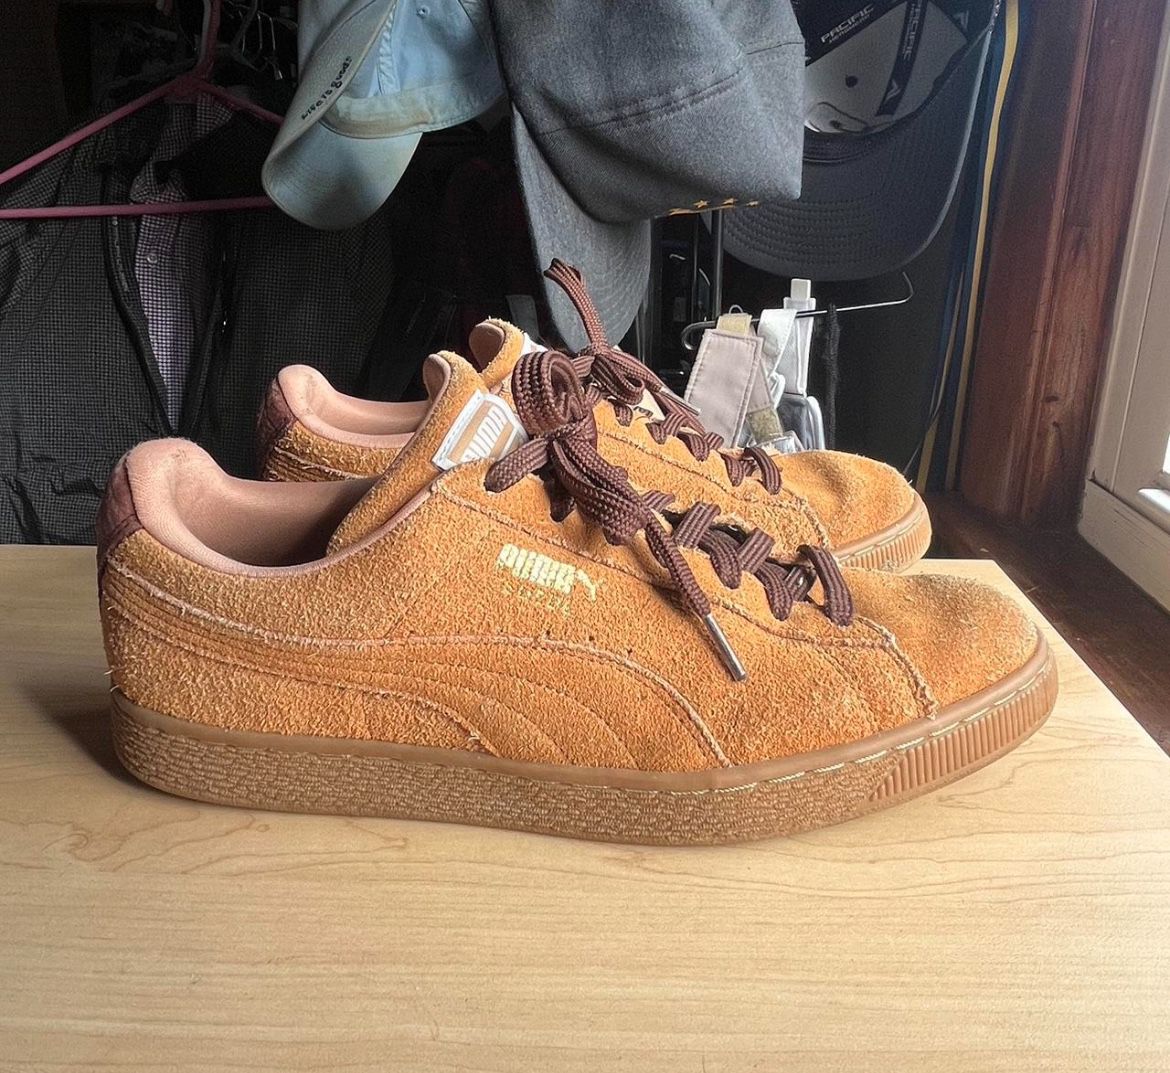 Puma Classic Suede Brown Tan Cream Elephant Print Low Top Size 10.5